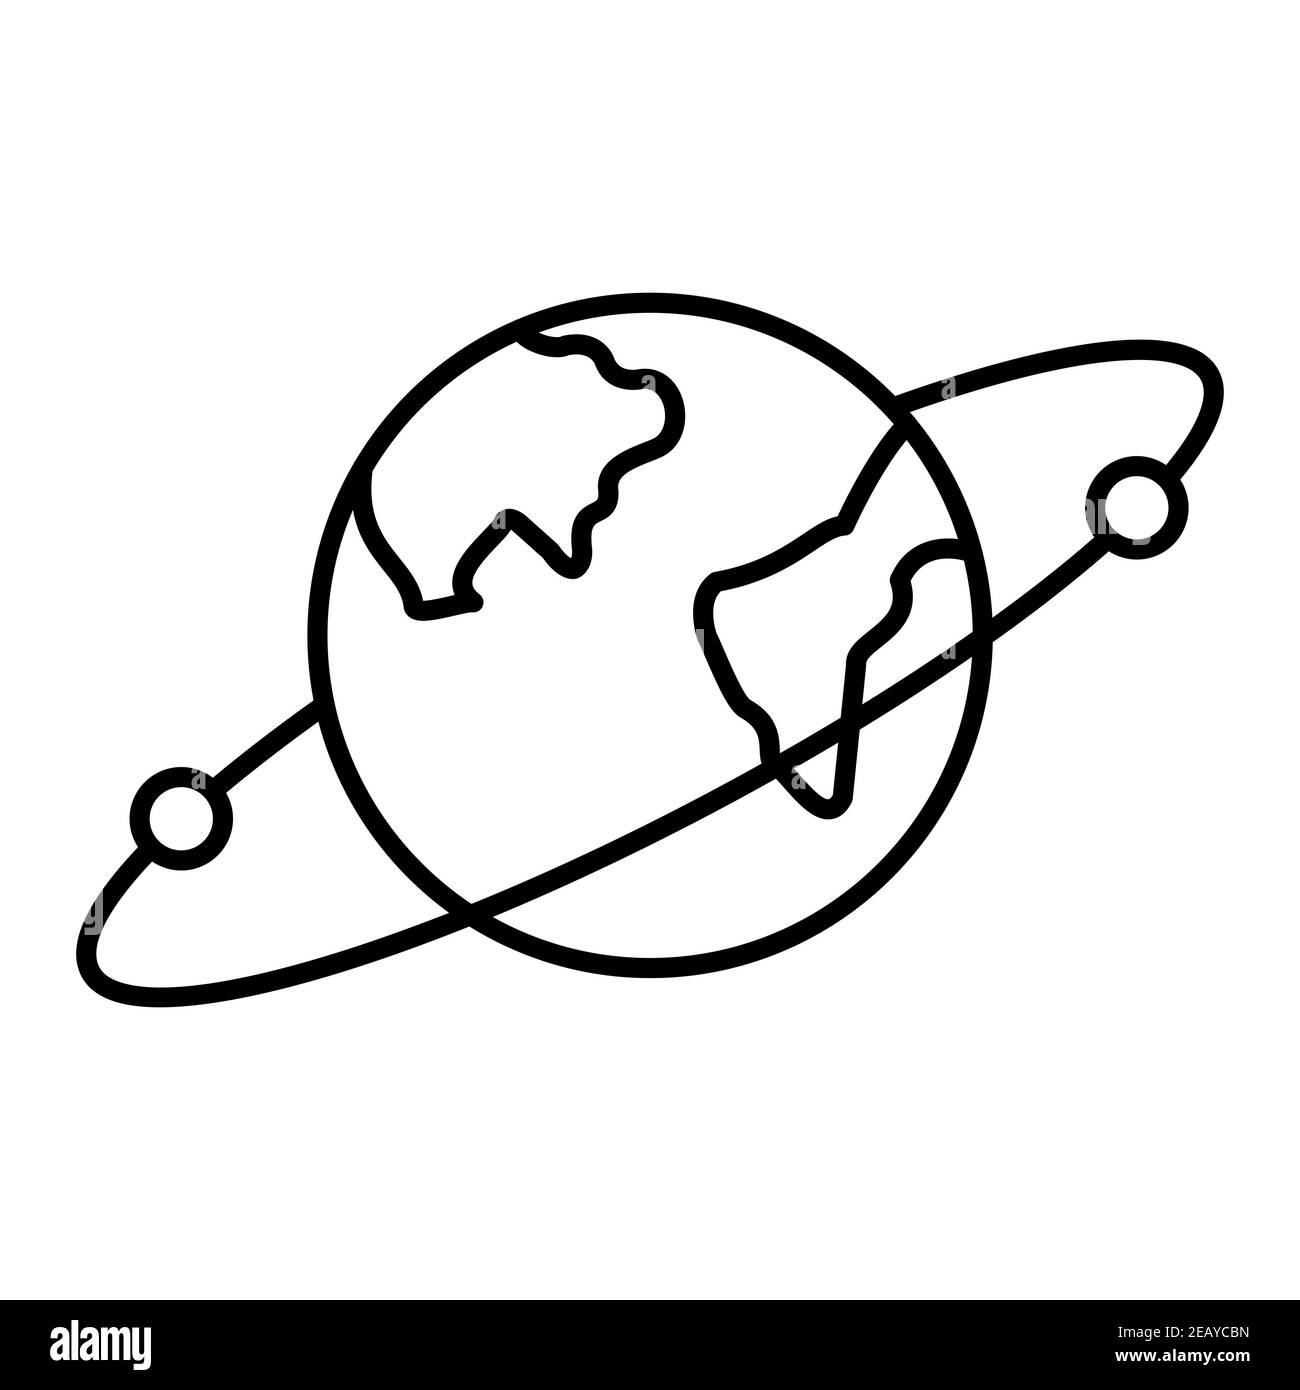 Earth orbit Black and White Stock Photos & Images - Alamy